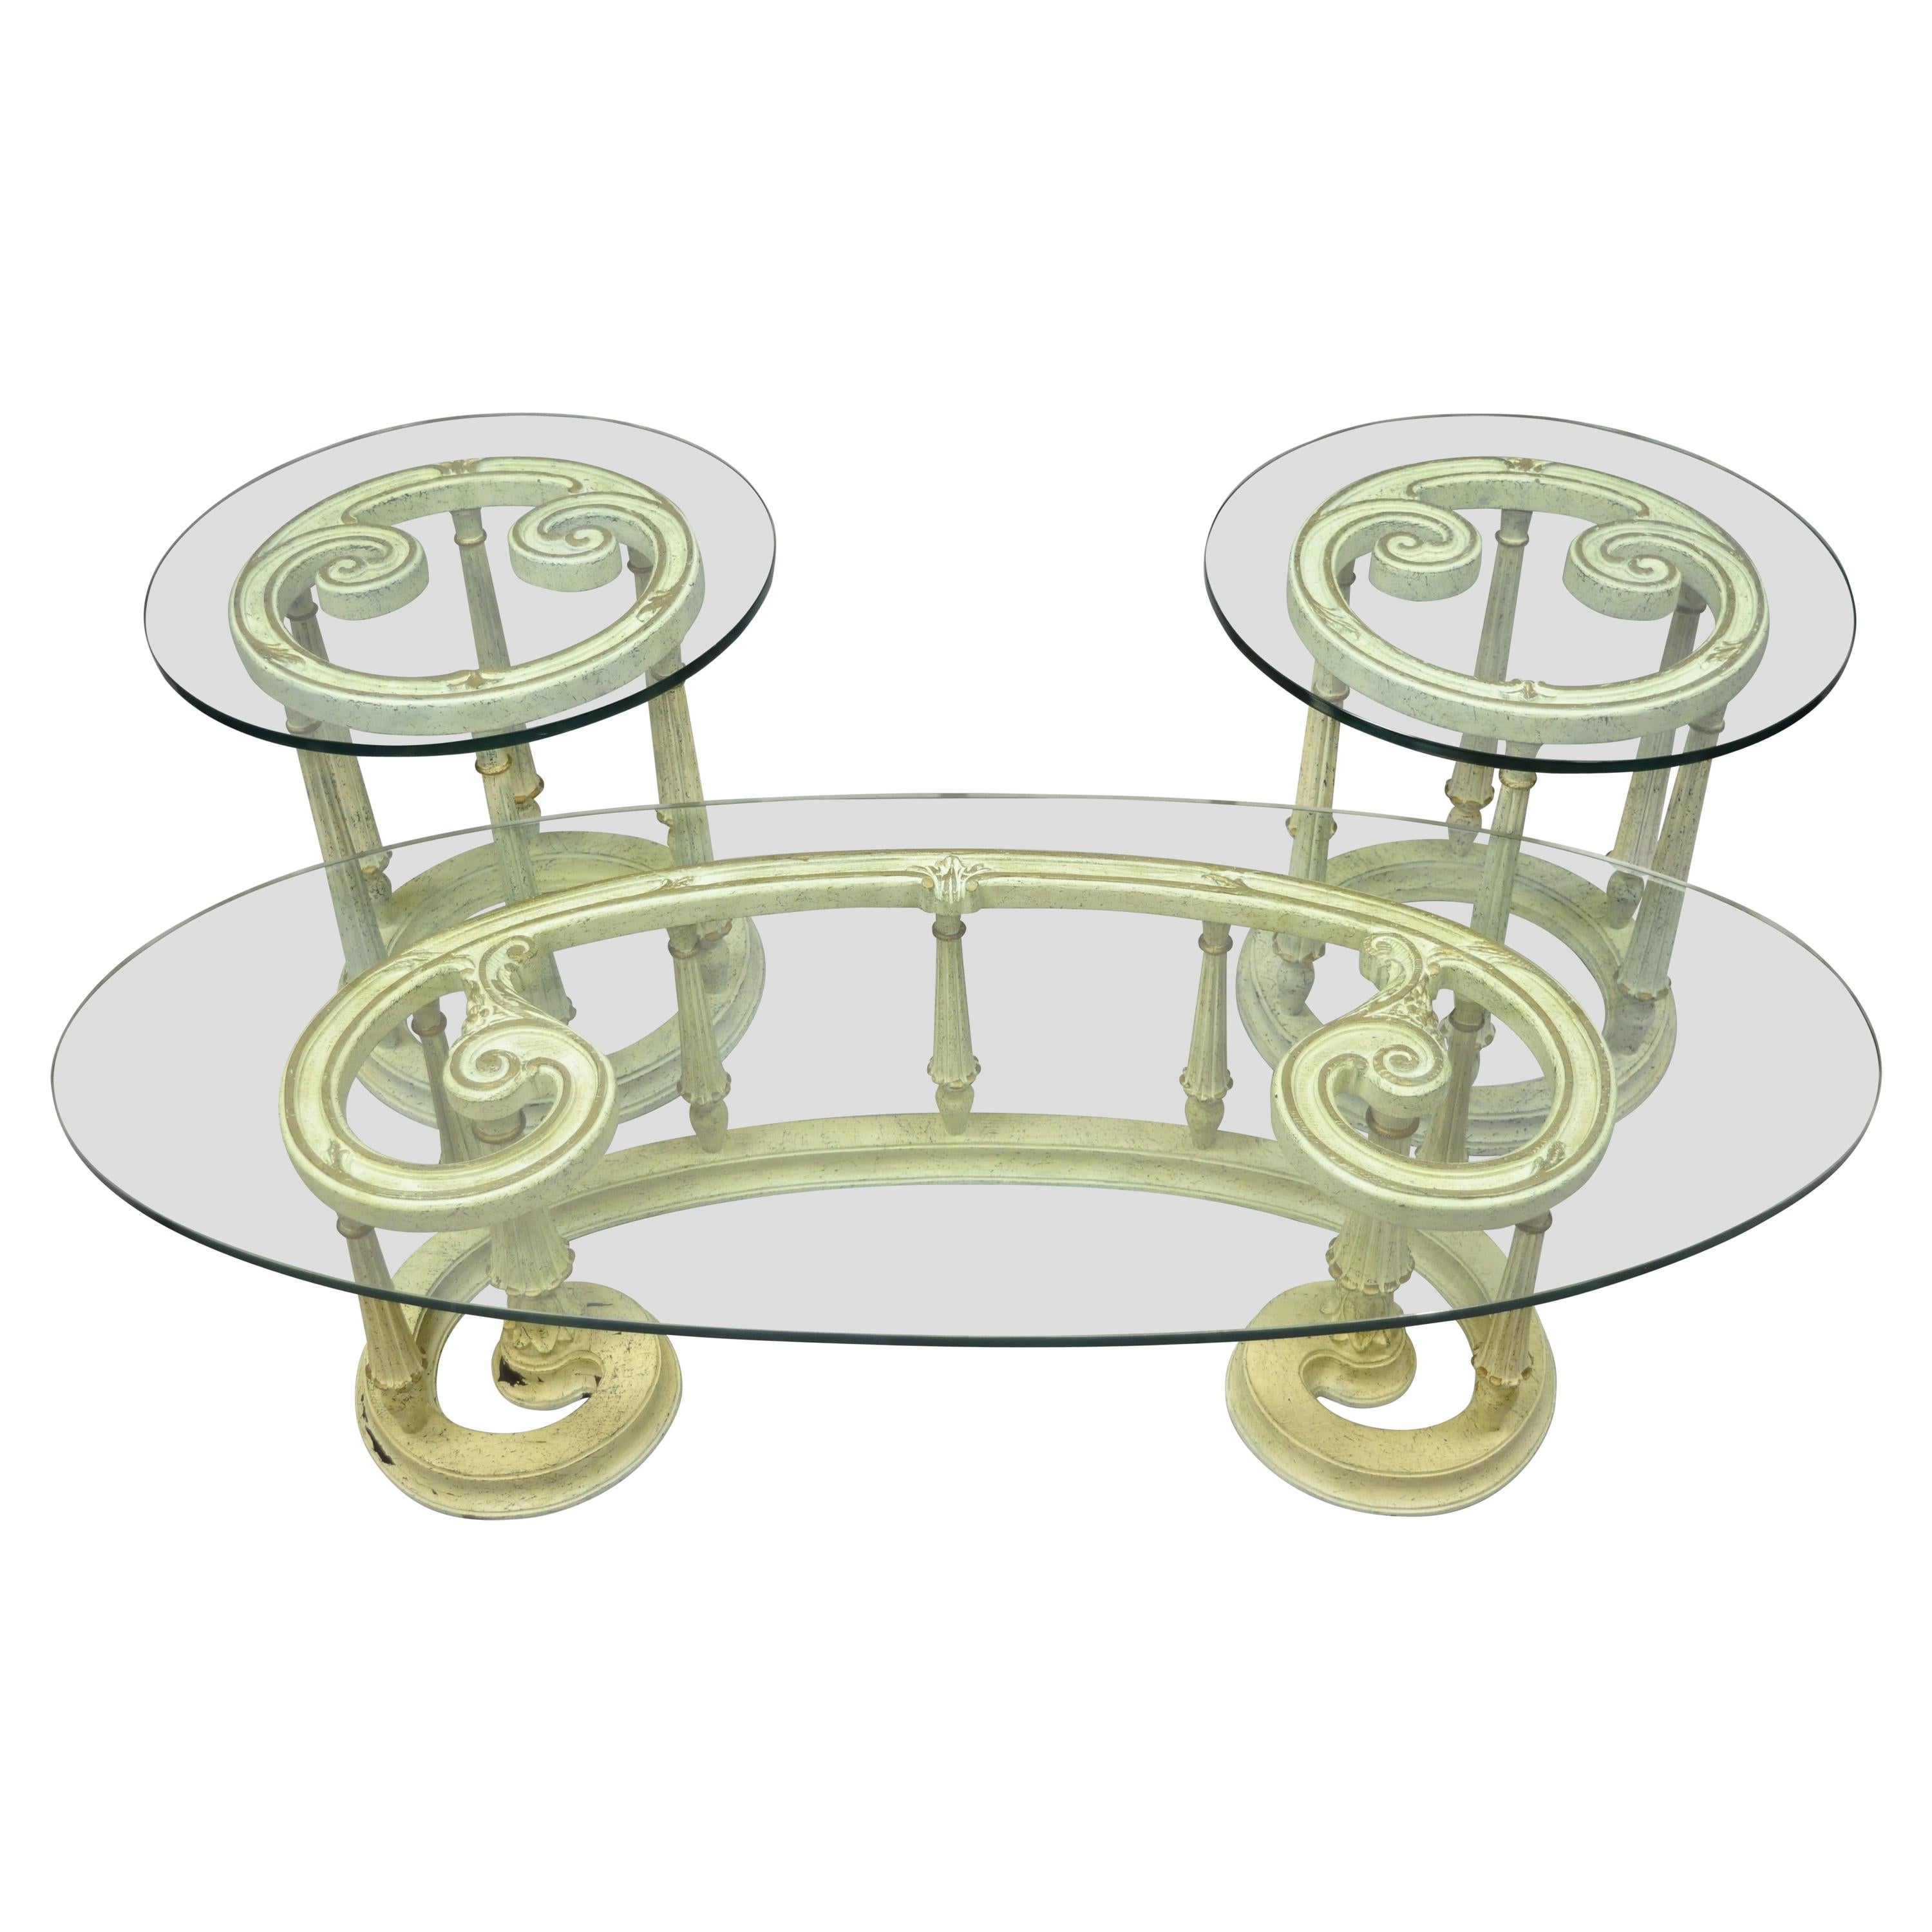 French Provincial Italian Scrollwork Wood Base Glass Top Coffee Table, 3 Pc Set For Sale